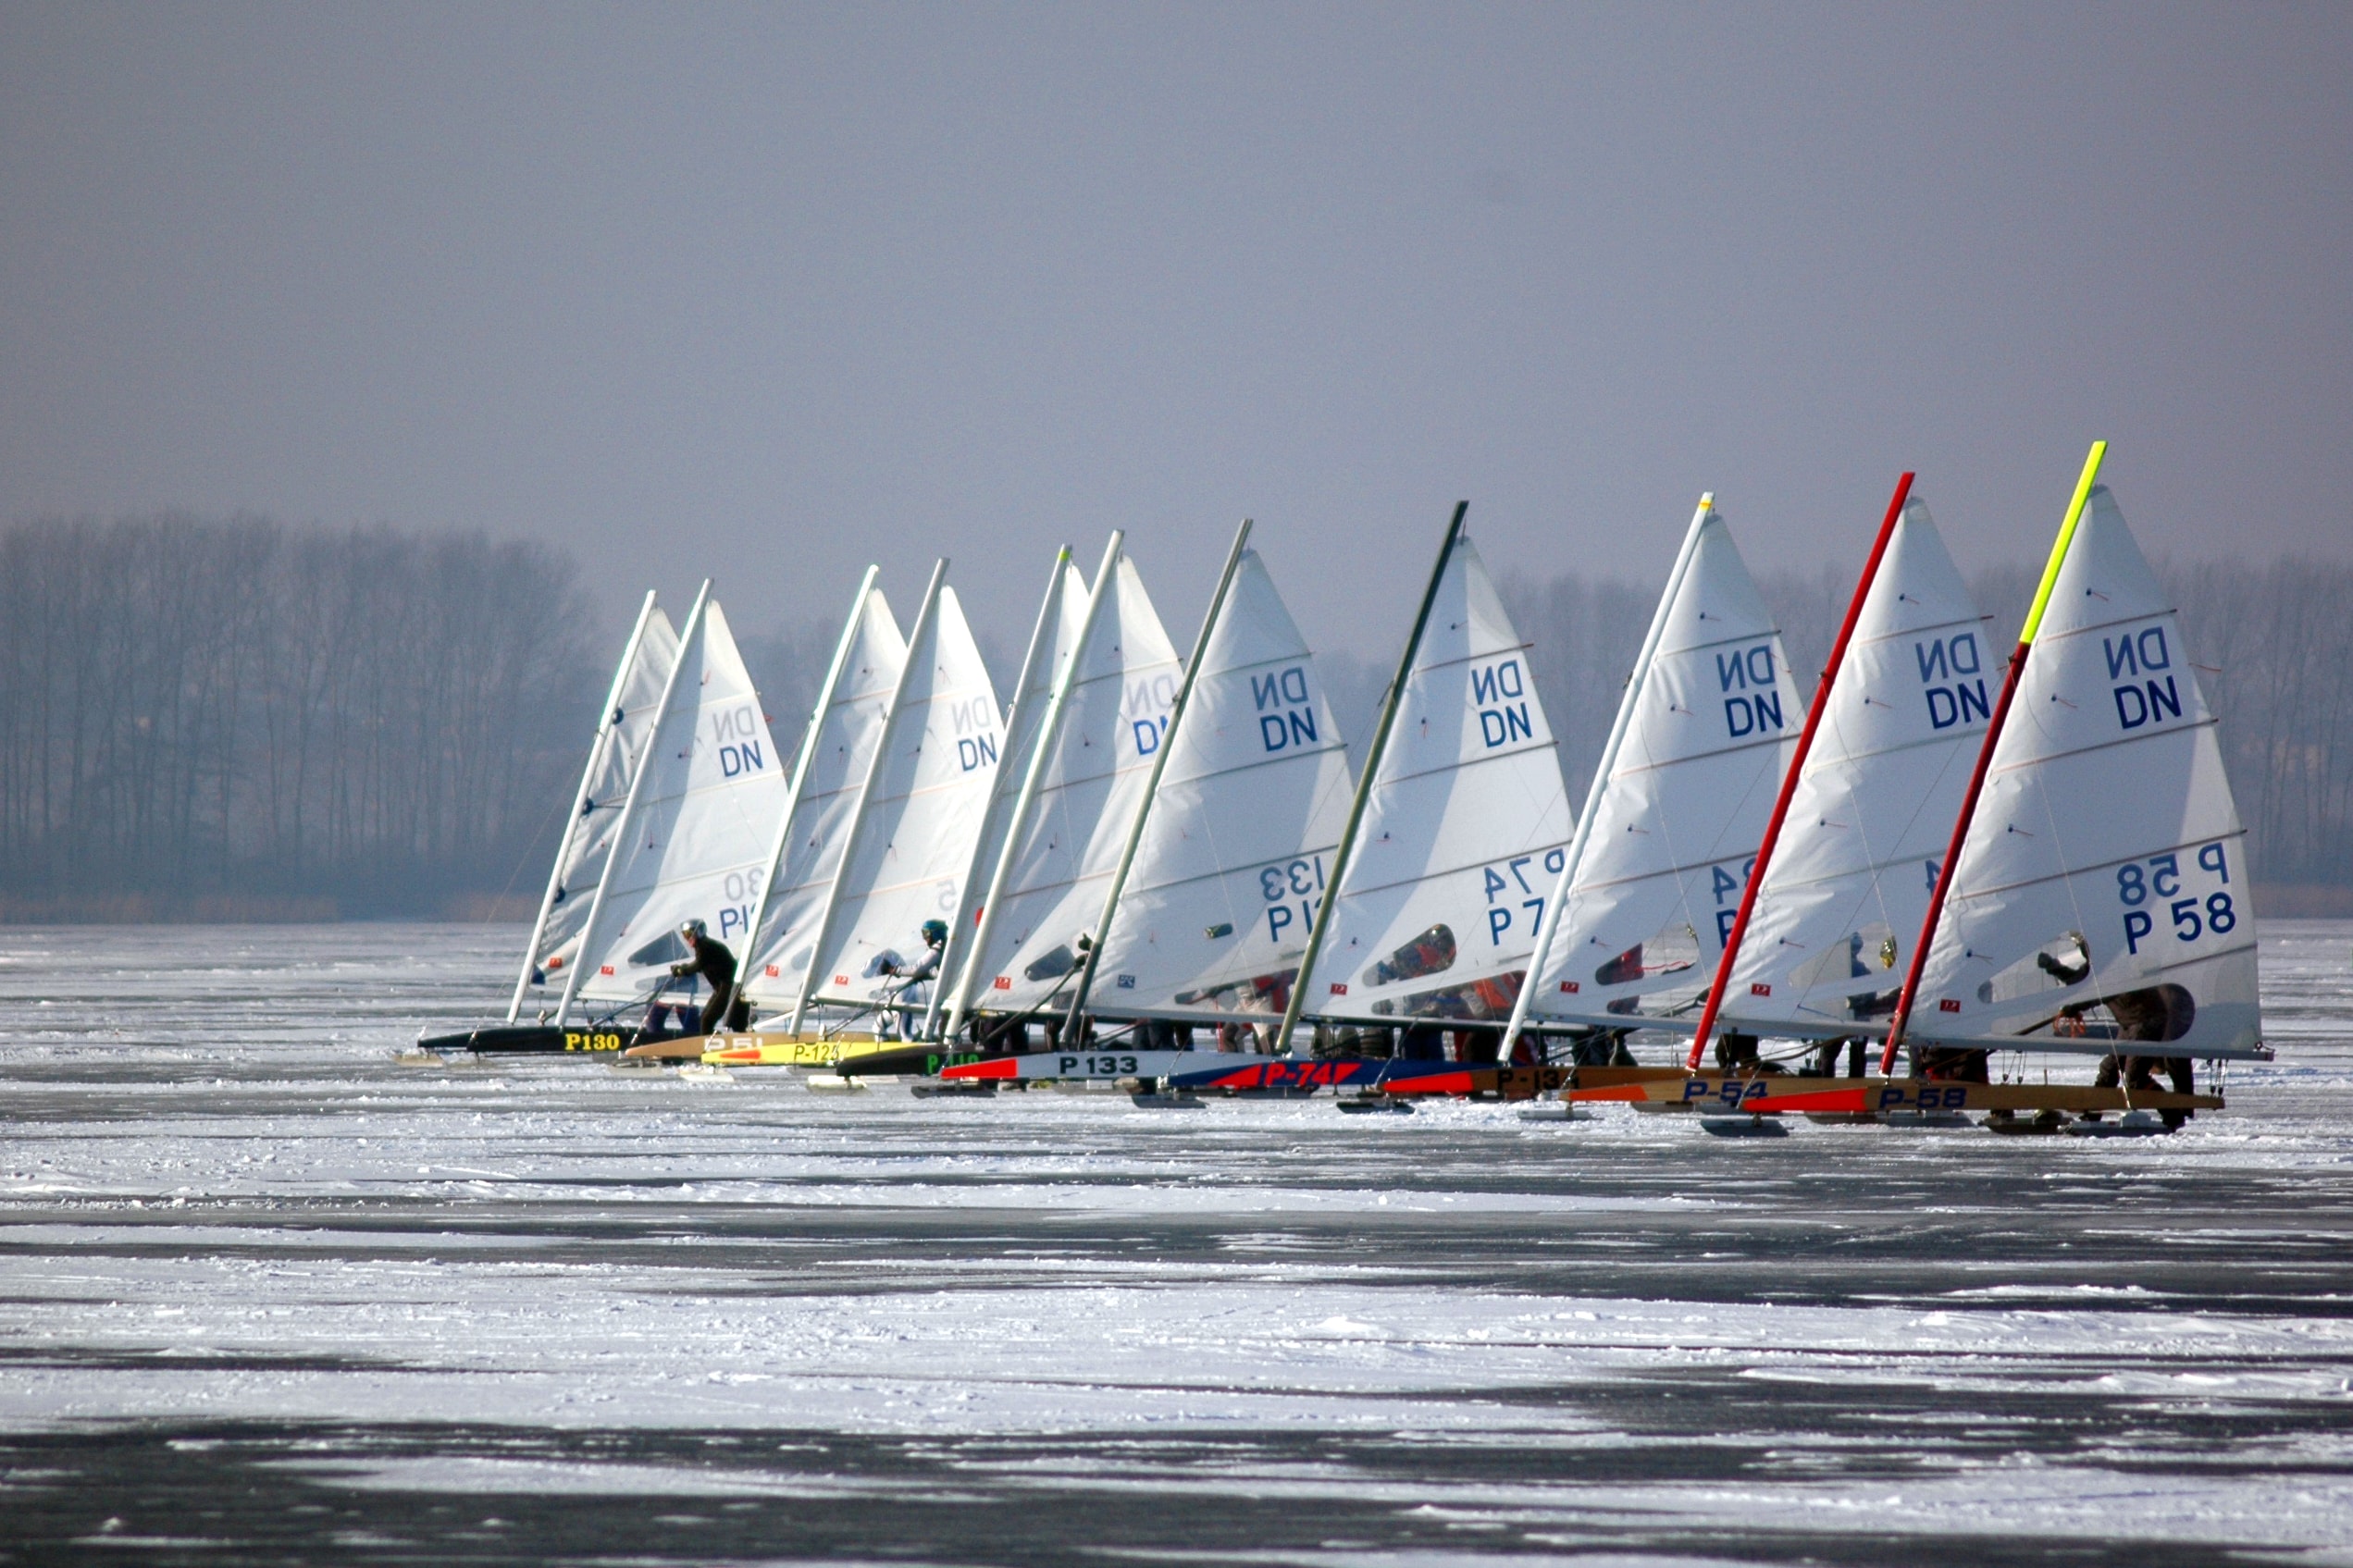 Iceboats line up to race.